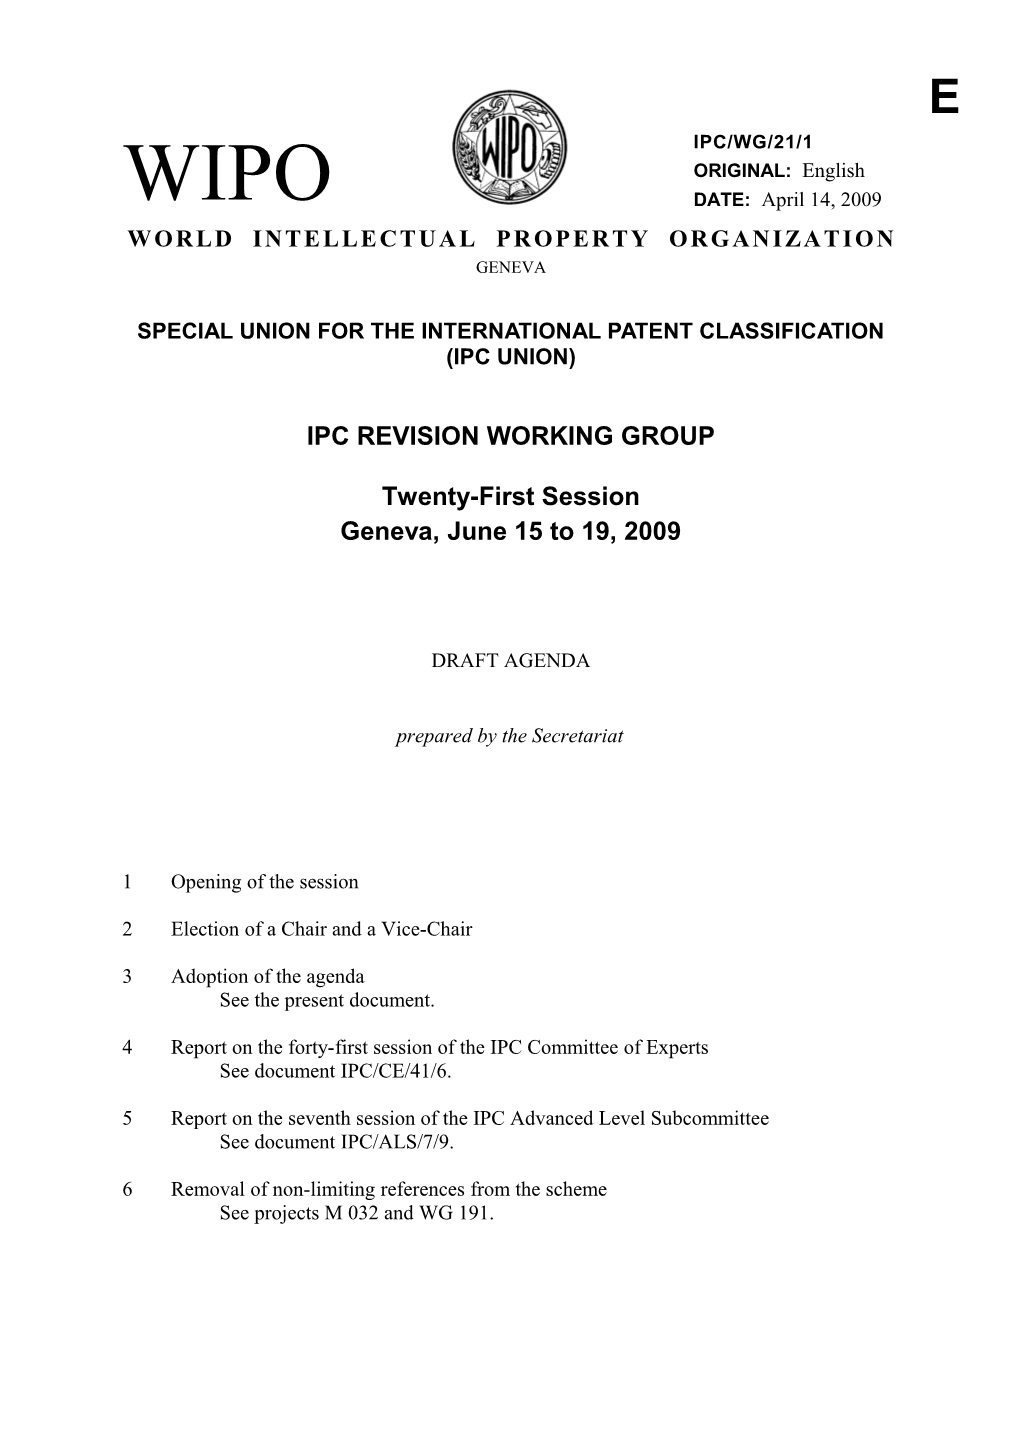 Document IPC/WG/21/1, Agenda, Twenty-First Session of the IPC Revision Working Group